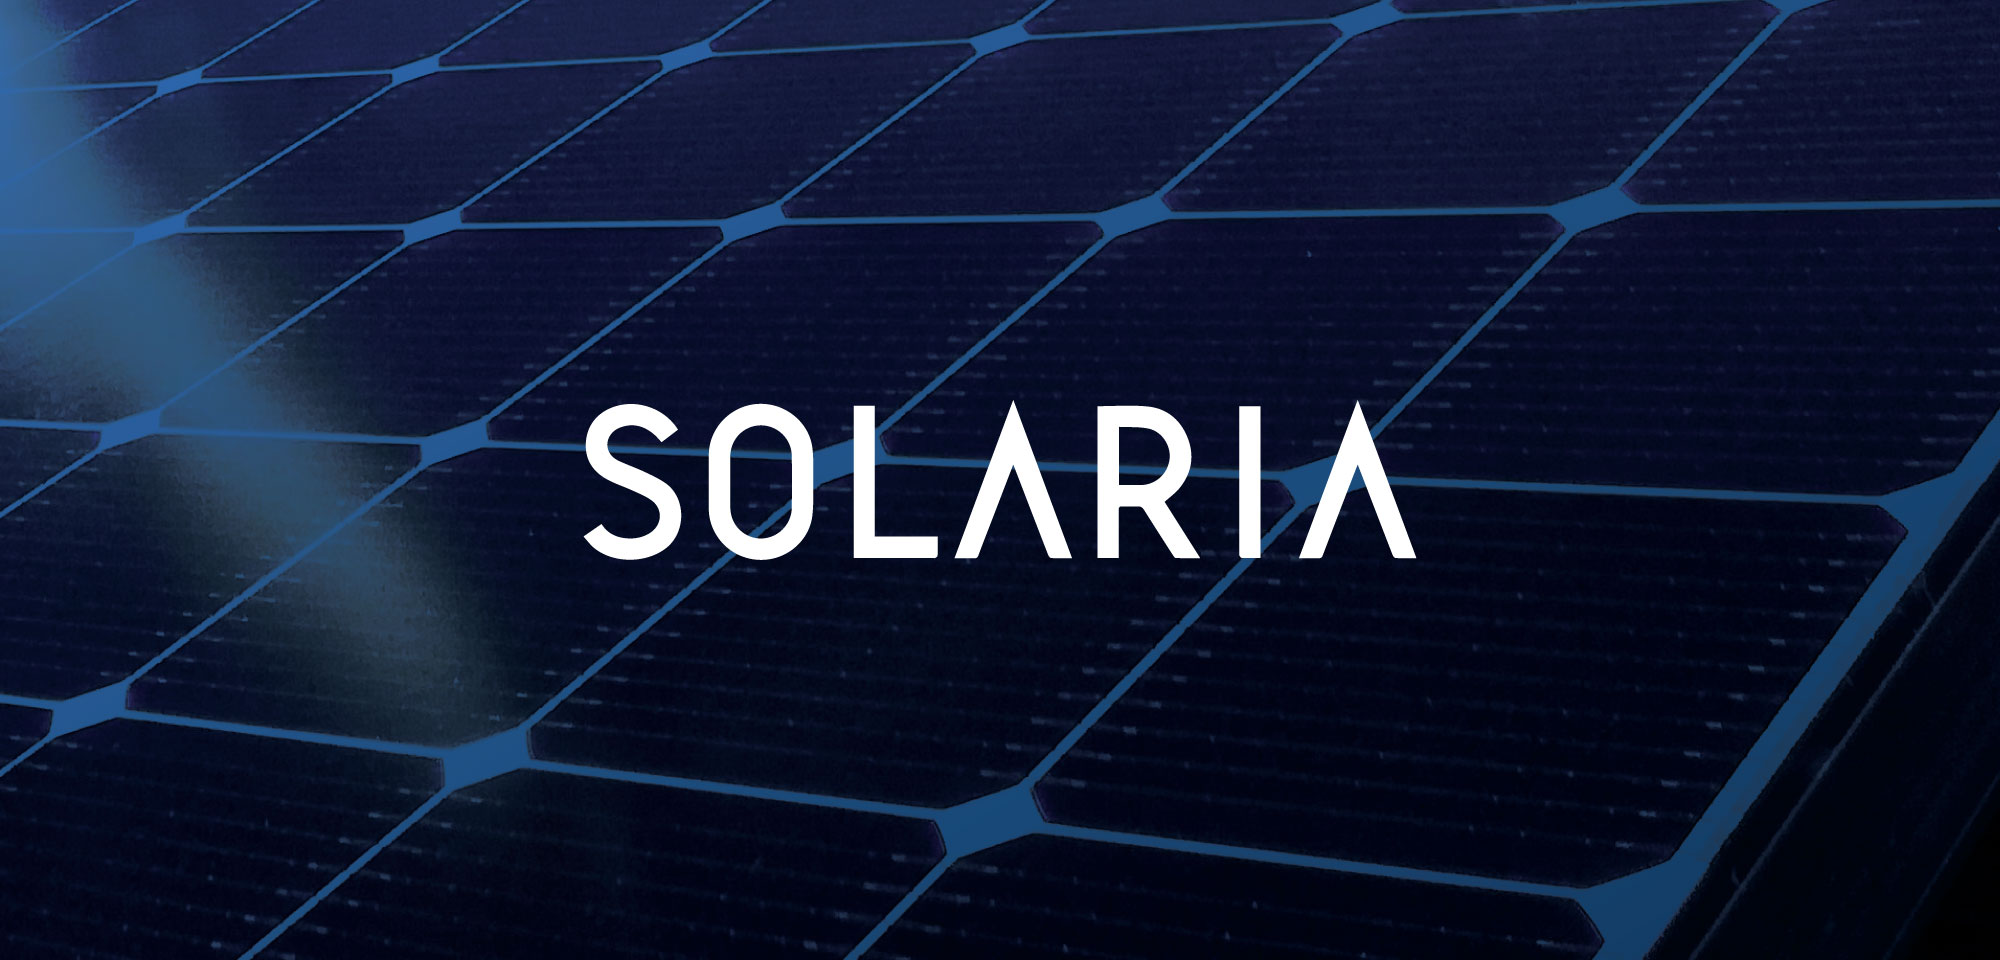 Complete review of Solaria solar panels